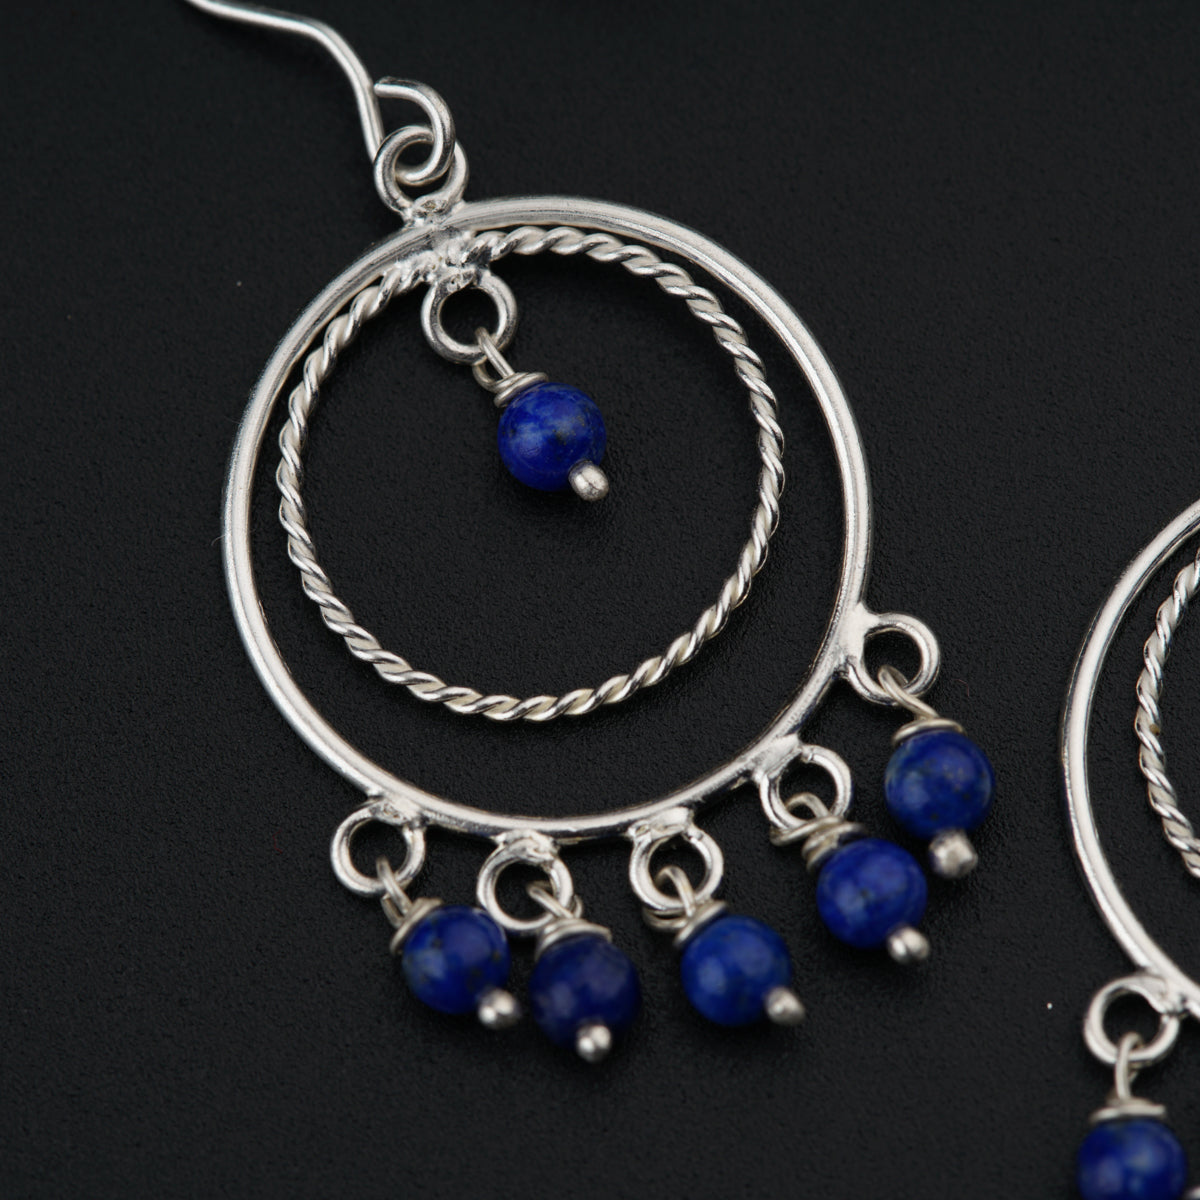 a pair of silver hoop earrings with blue beads